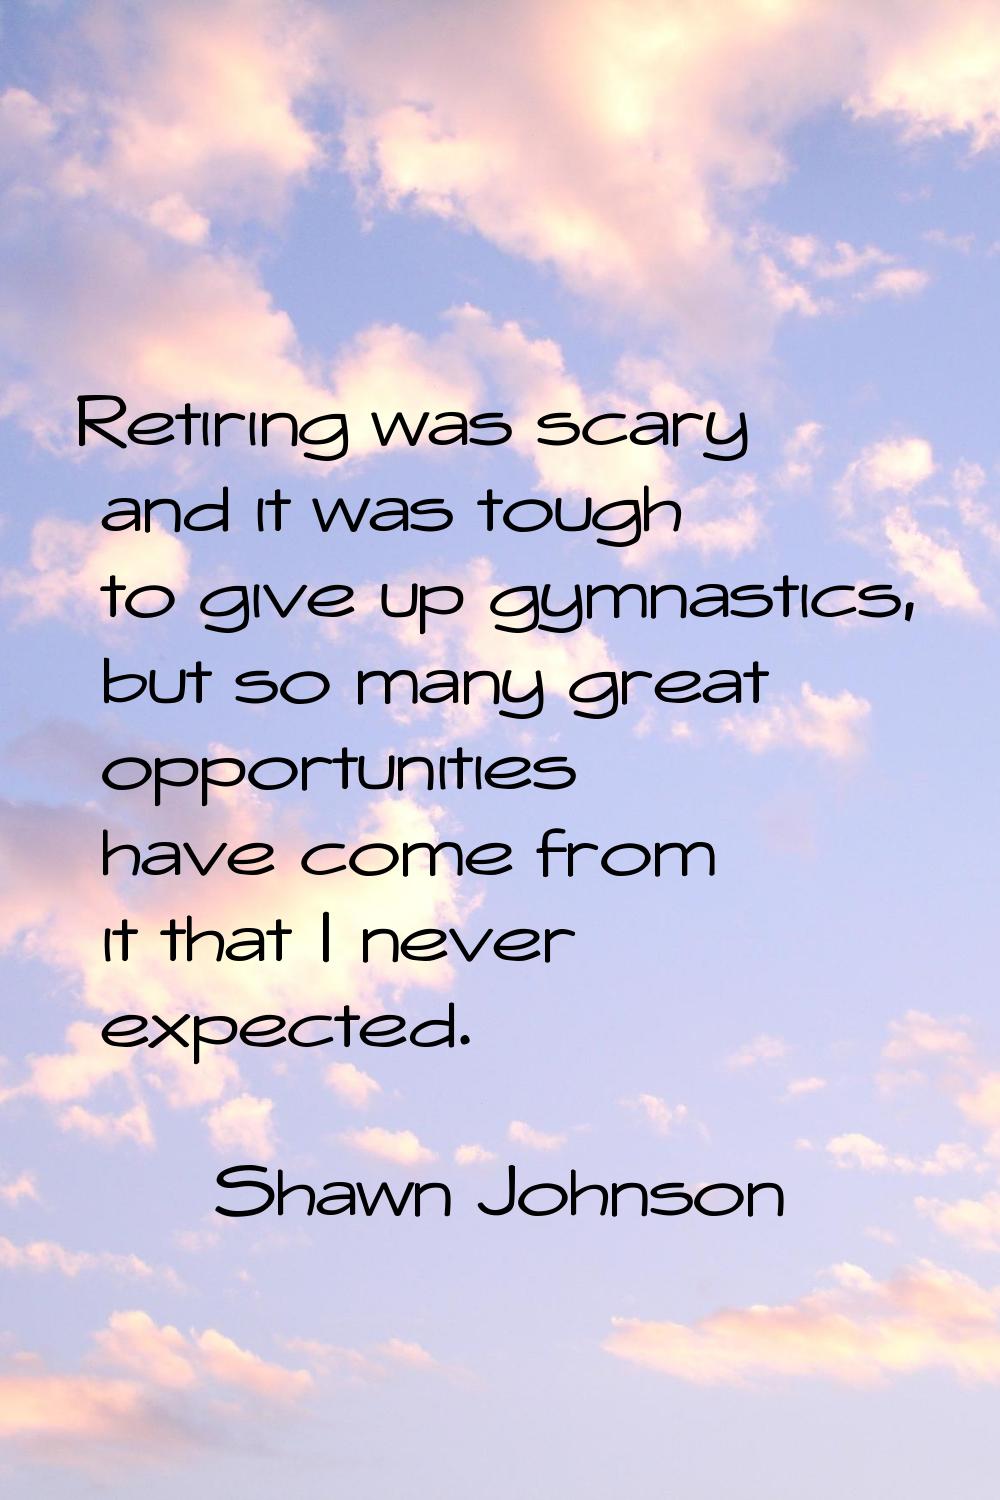 Retiring was scary and it was tough to give up gymnastics, but so many great opportunities have com